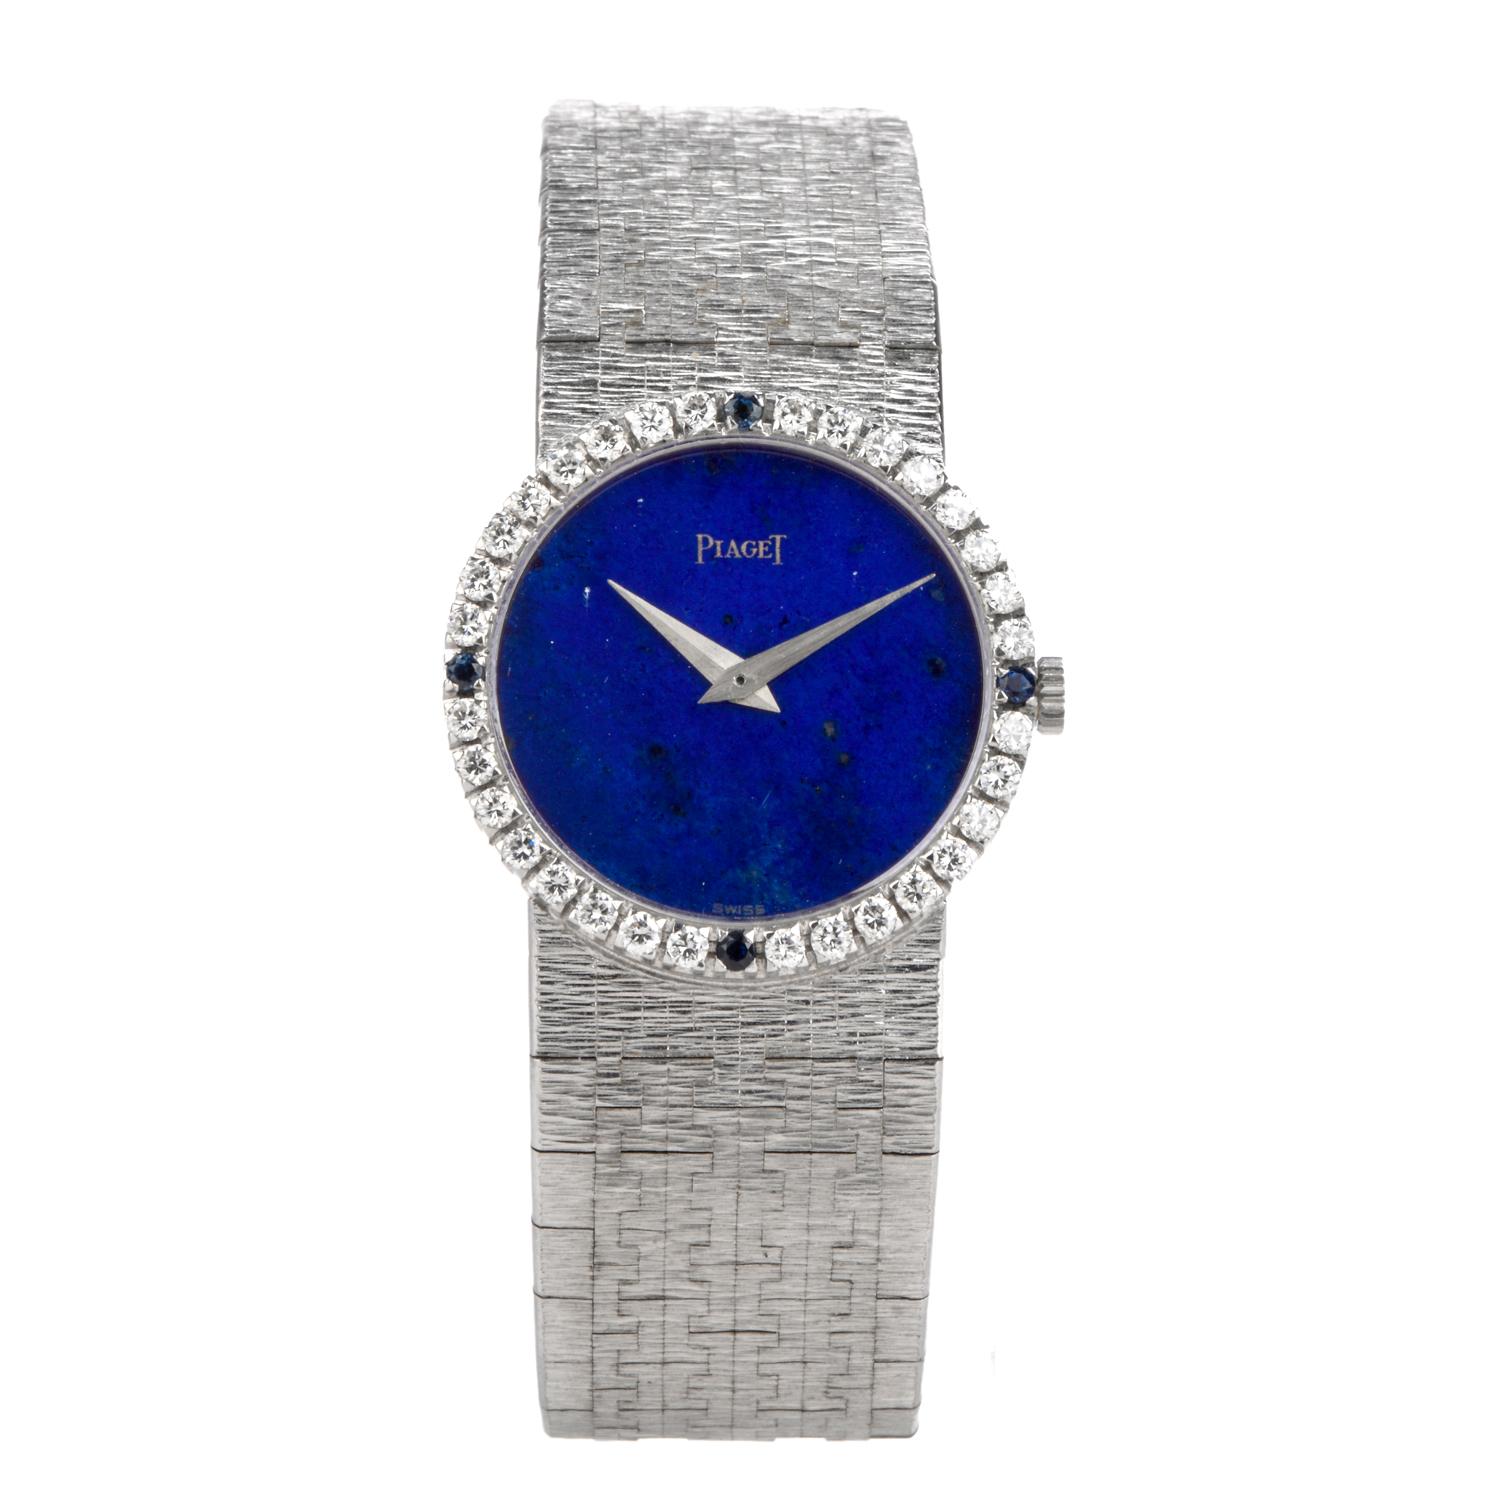 Circa Late 1960’s designer Piaget ladies watch crafted in solid 18-karat white gold. Embellished with a 32 diamond and 4 blue sapphire crown. Sapphire Crystal ,lapis Dial, 24mm case with 32 factory set round diamonds approx. 0.75 carats, E-F color